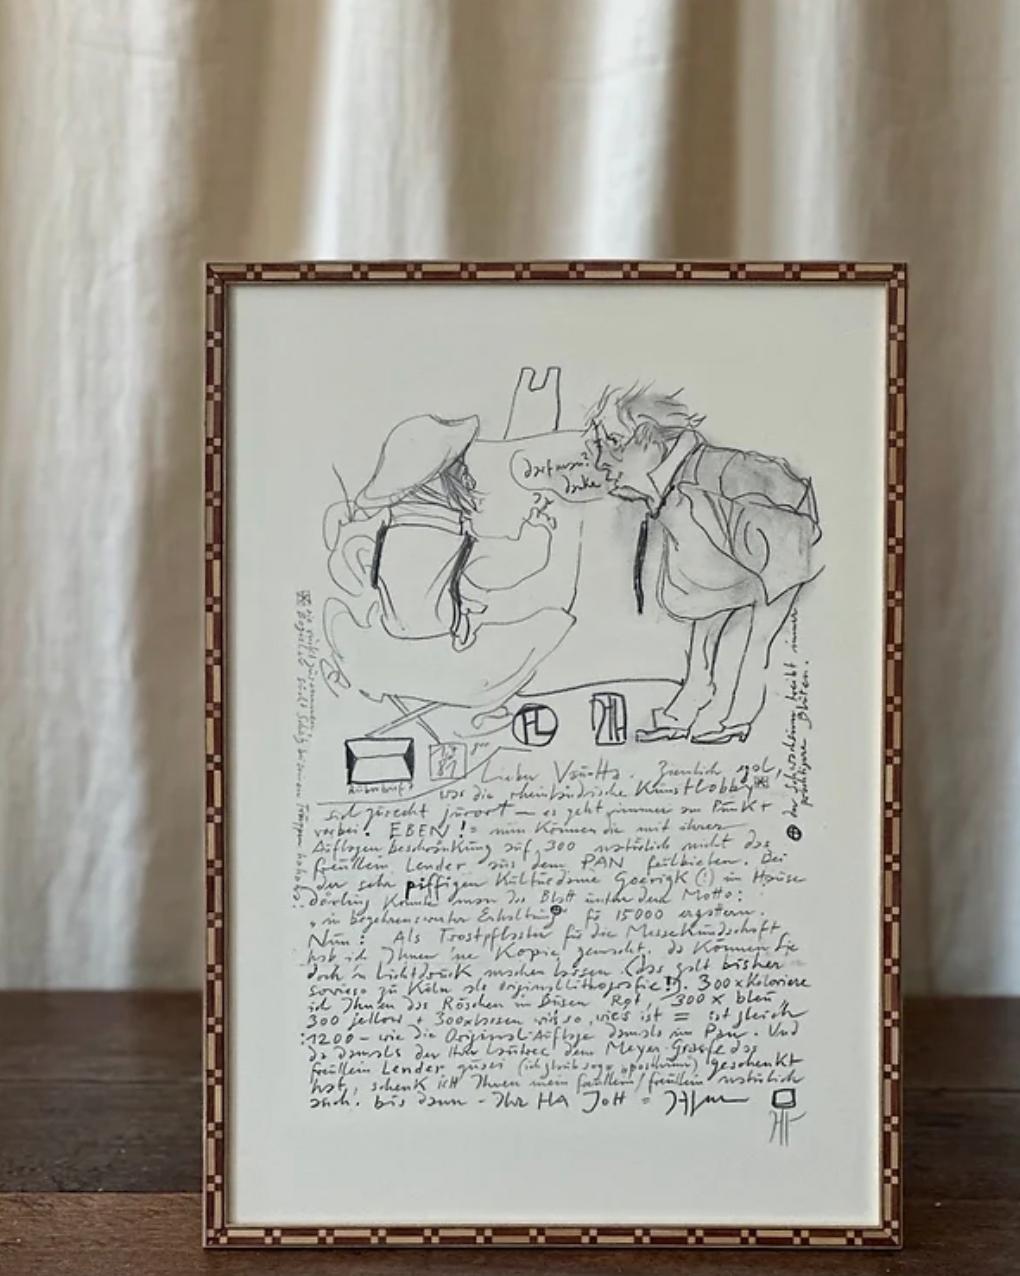 Framed Hand-signed Collotype from 1981
Humorous self-portrait with Henri de Toulouse-Lautrec

Signed In Pencil Lower Right: HJanssen

Horst Janssen (14 November 1929 – 31 August 1995) was a German draftsman, printmaker, poster artist and